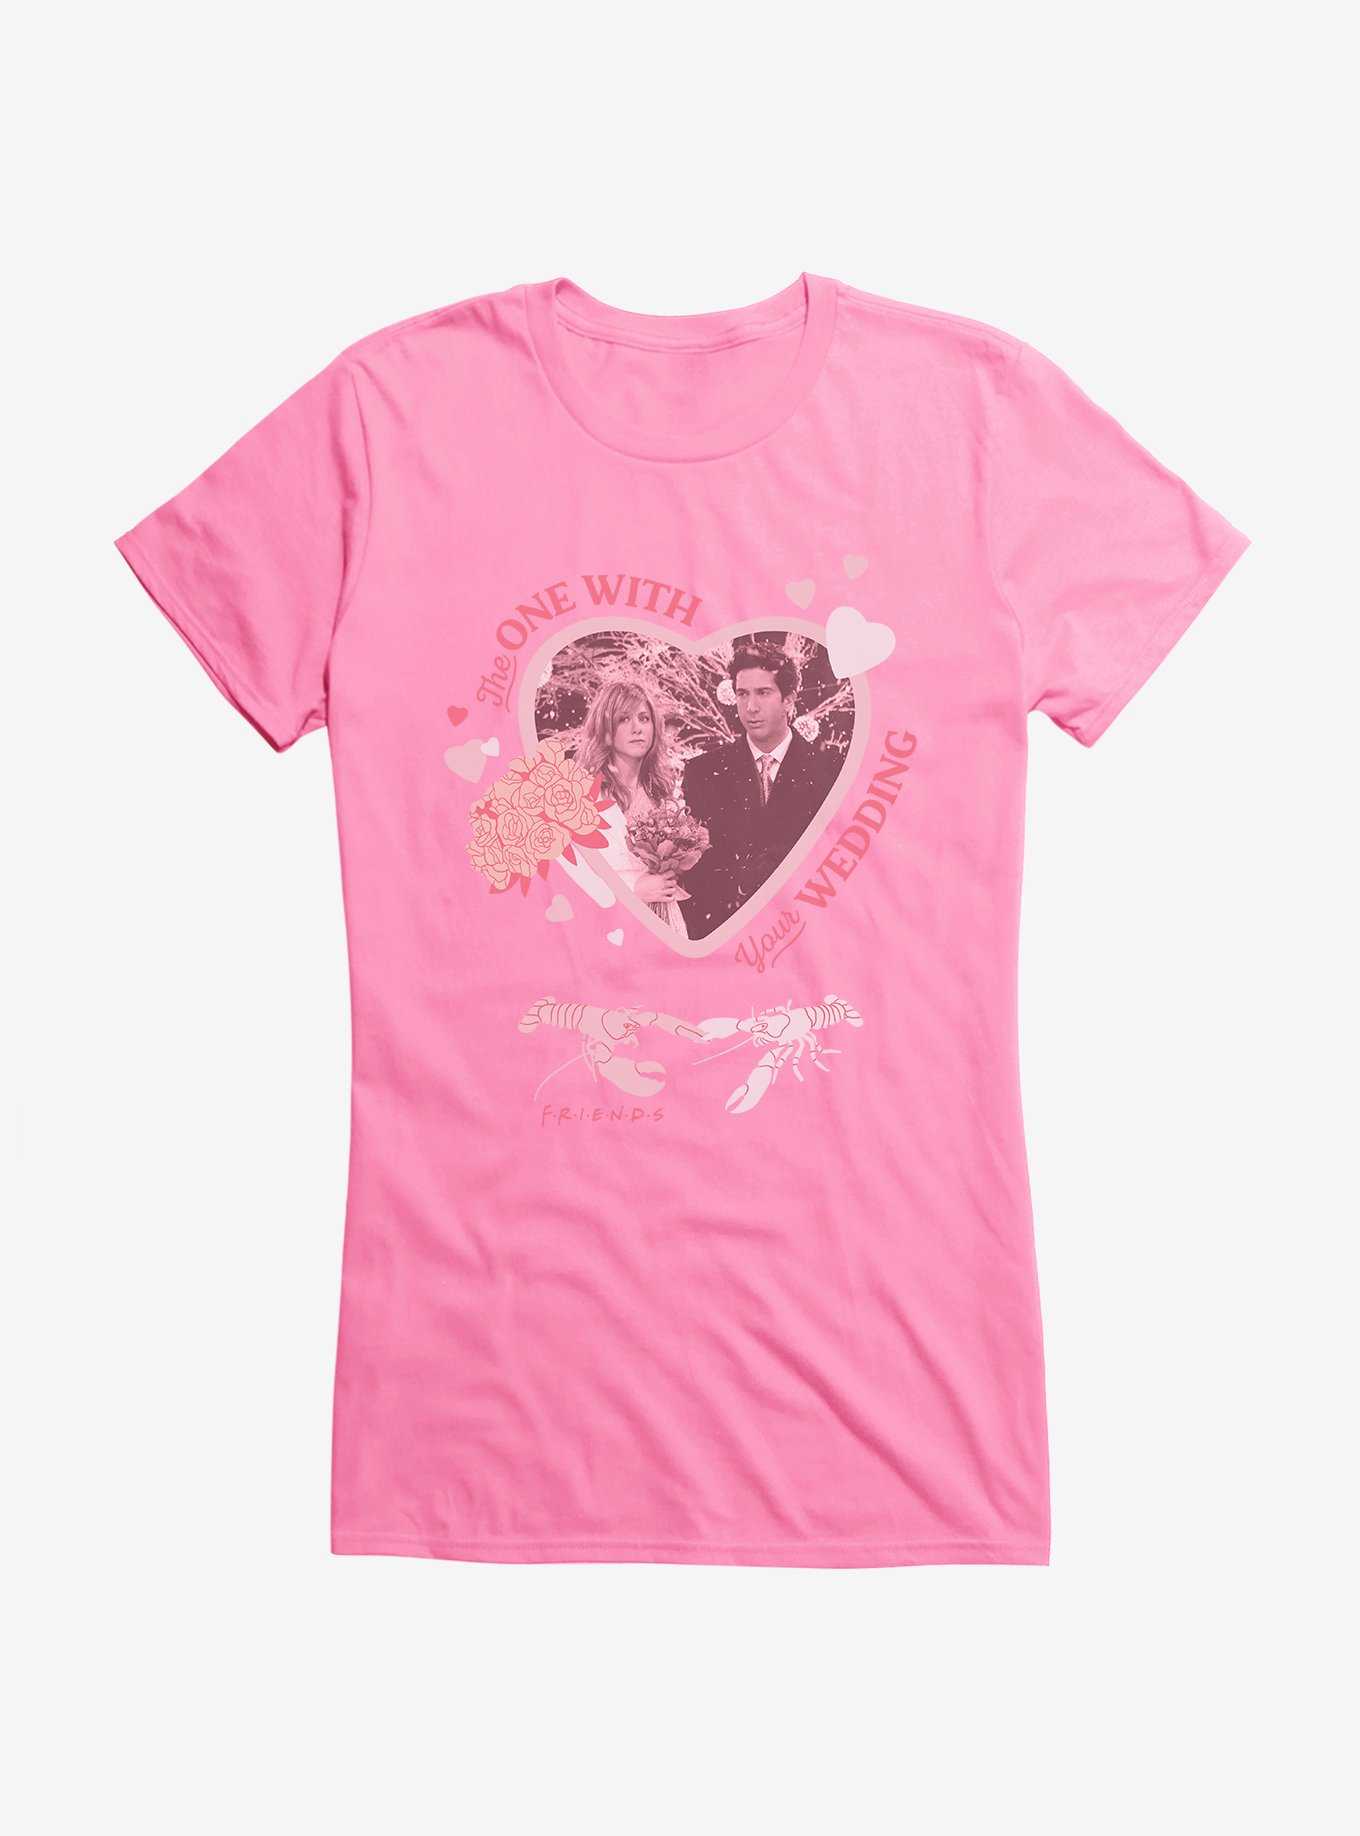 Friends The One With Your Wedding Girls T-Shirt, CHARITY PINK, hi-res